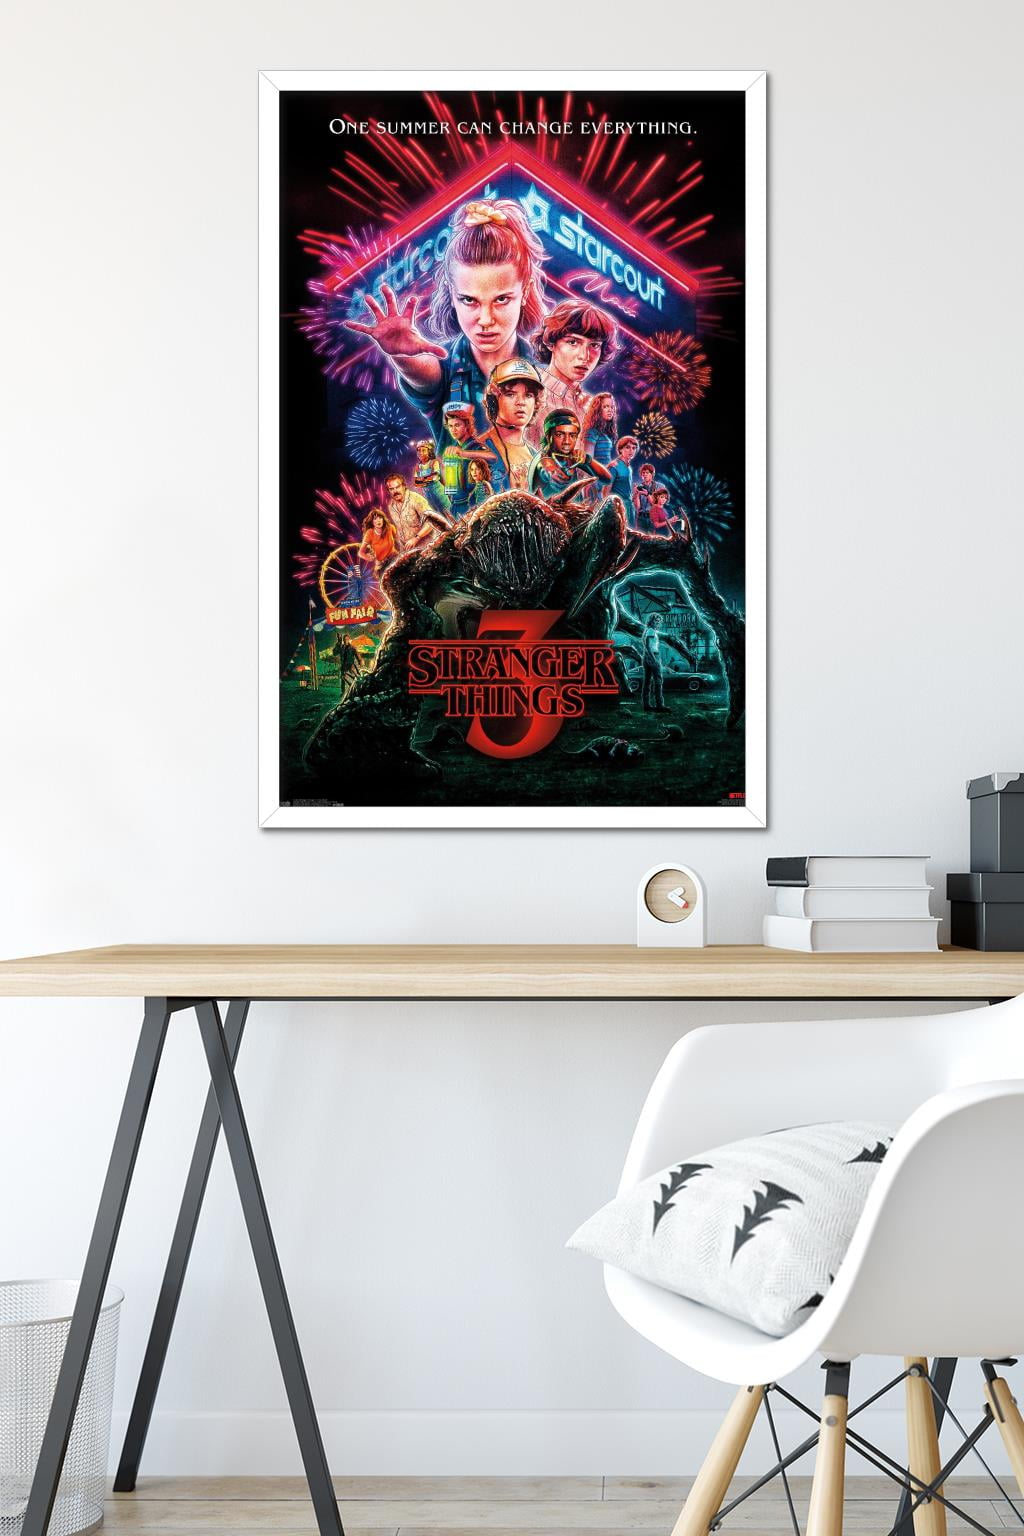  JIANLE Wendell And Wild Poster 2022 Horror Movies Home Decor  Poster Wall Art Hanging Picture Print Bedroom Decorative Painting Posters  Room Aesthetic 20x30inch(50x75cm): Posters & Prints